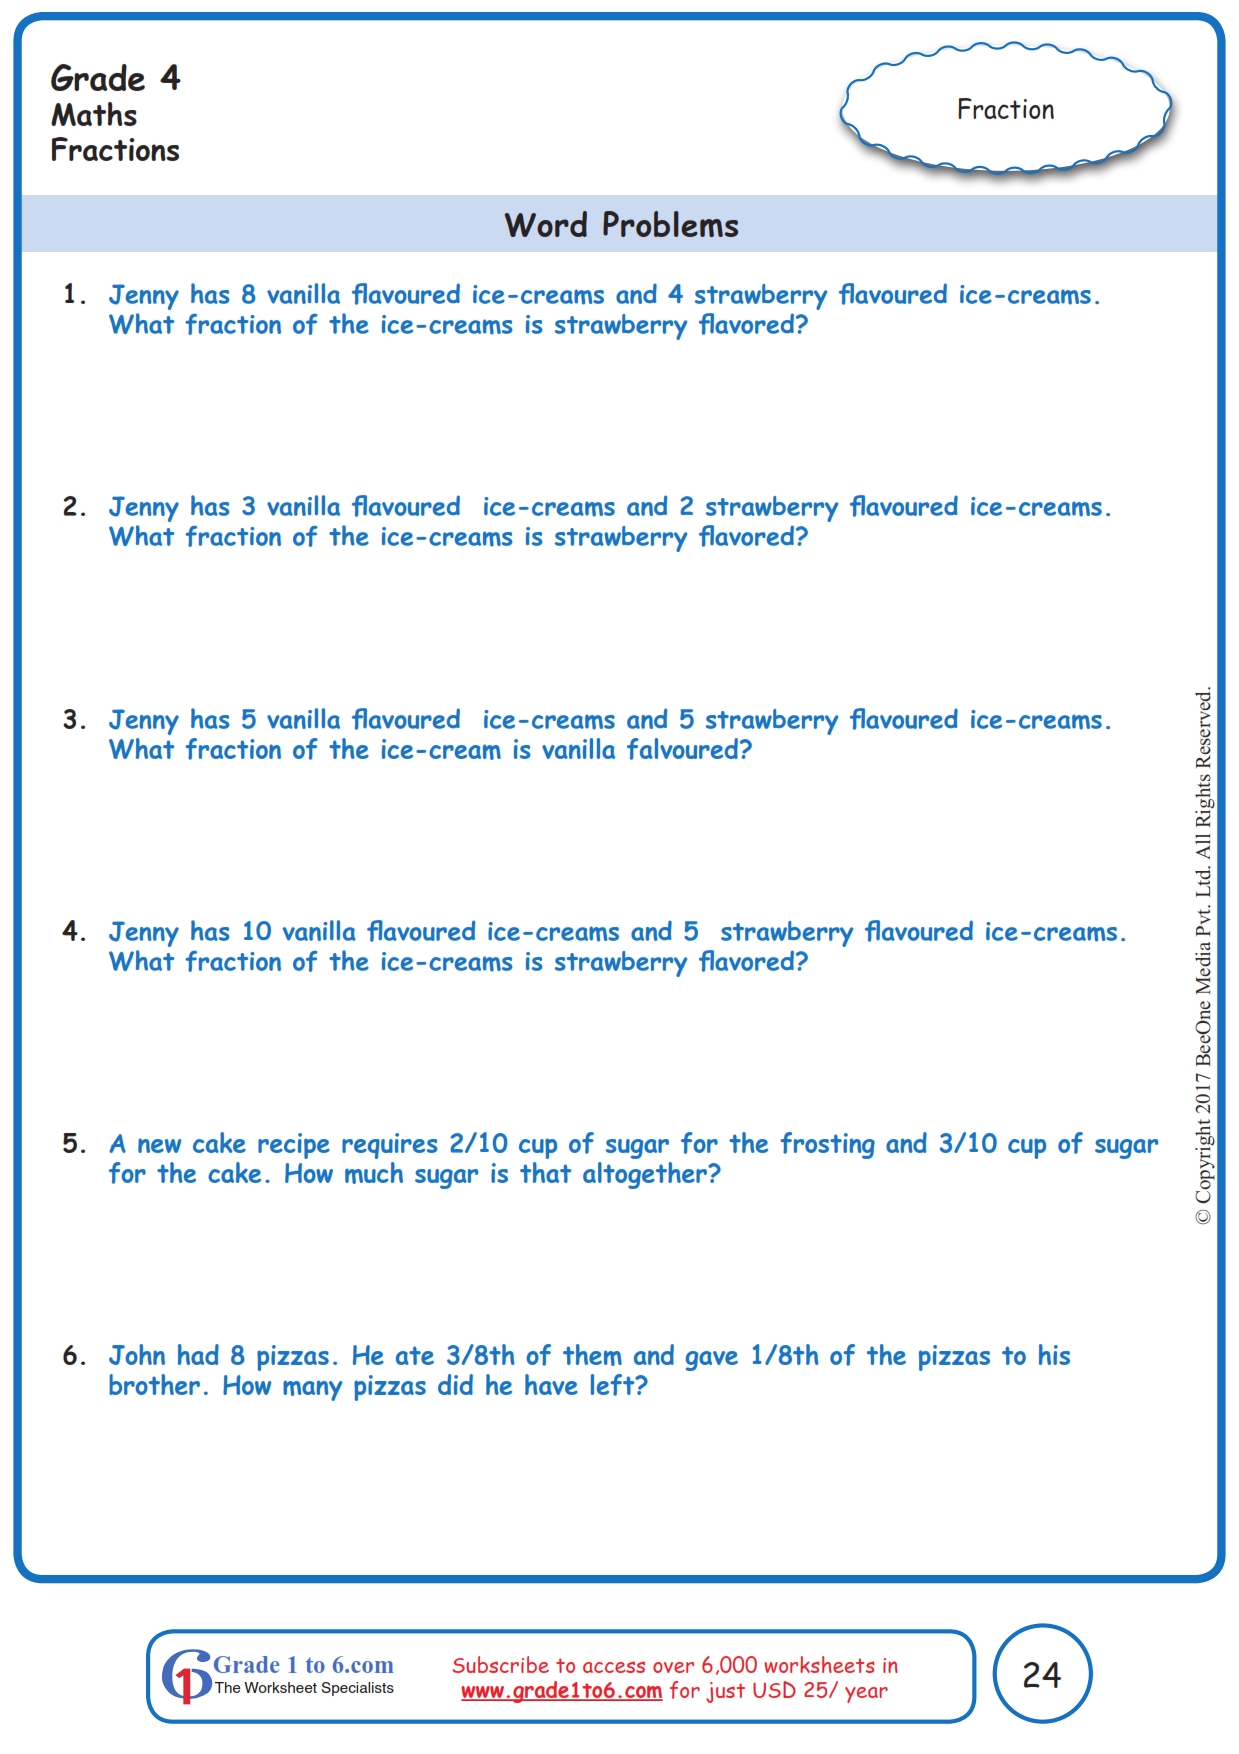 fractions-word-problems-worksheets-www-grade1to6